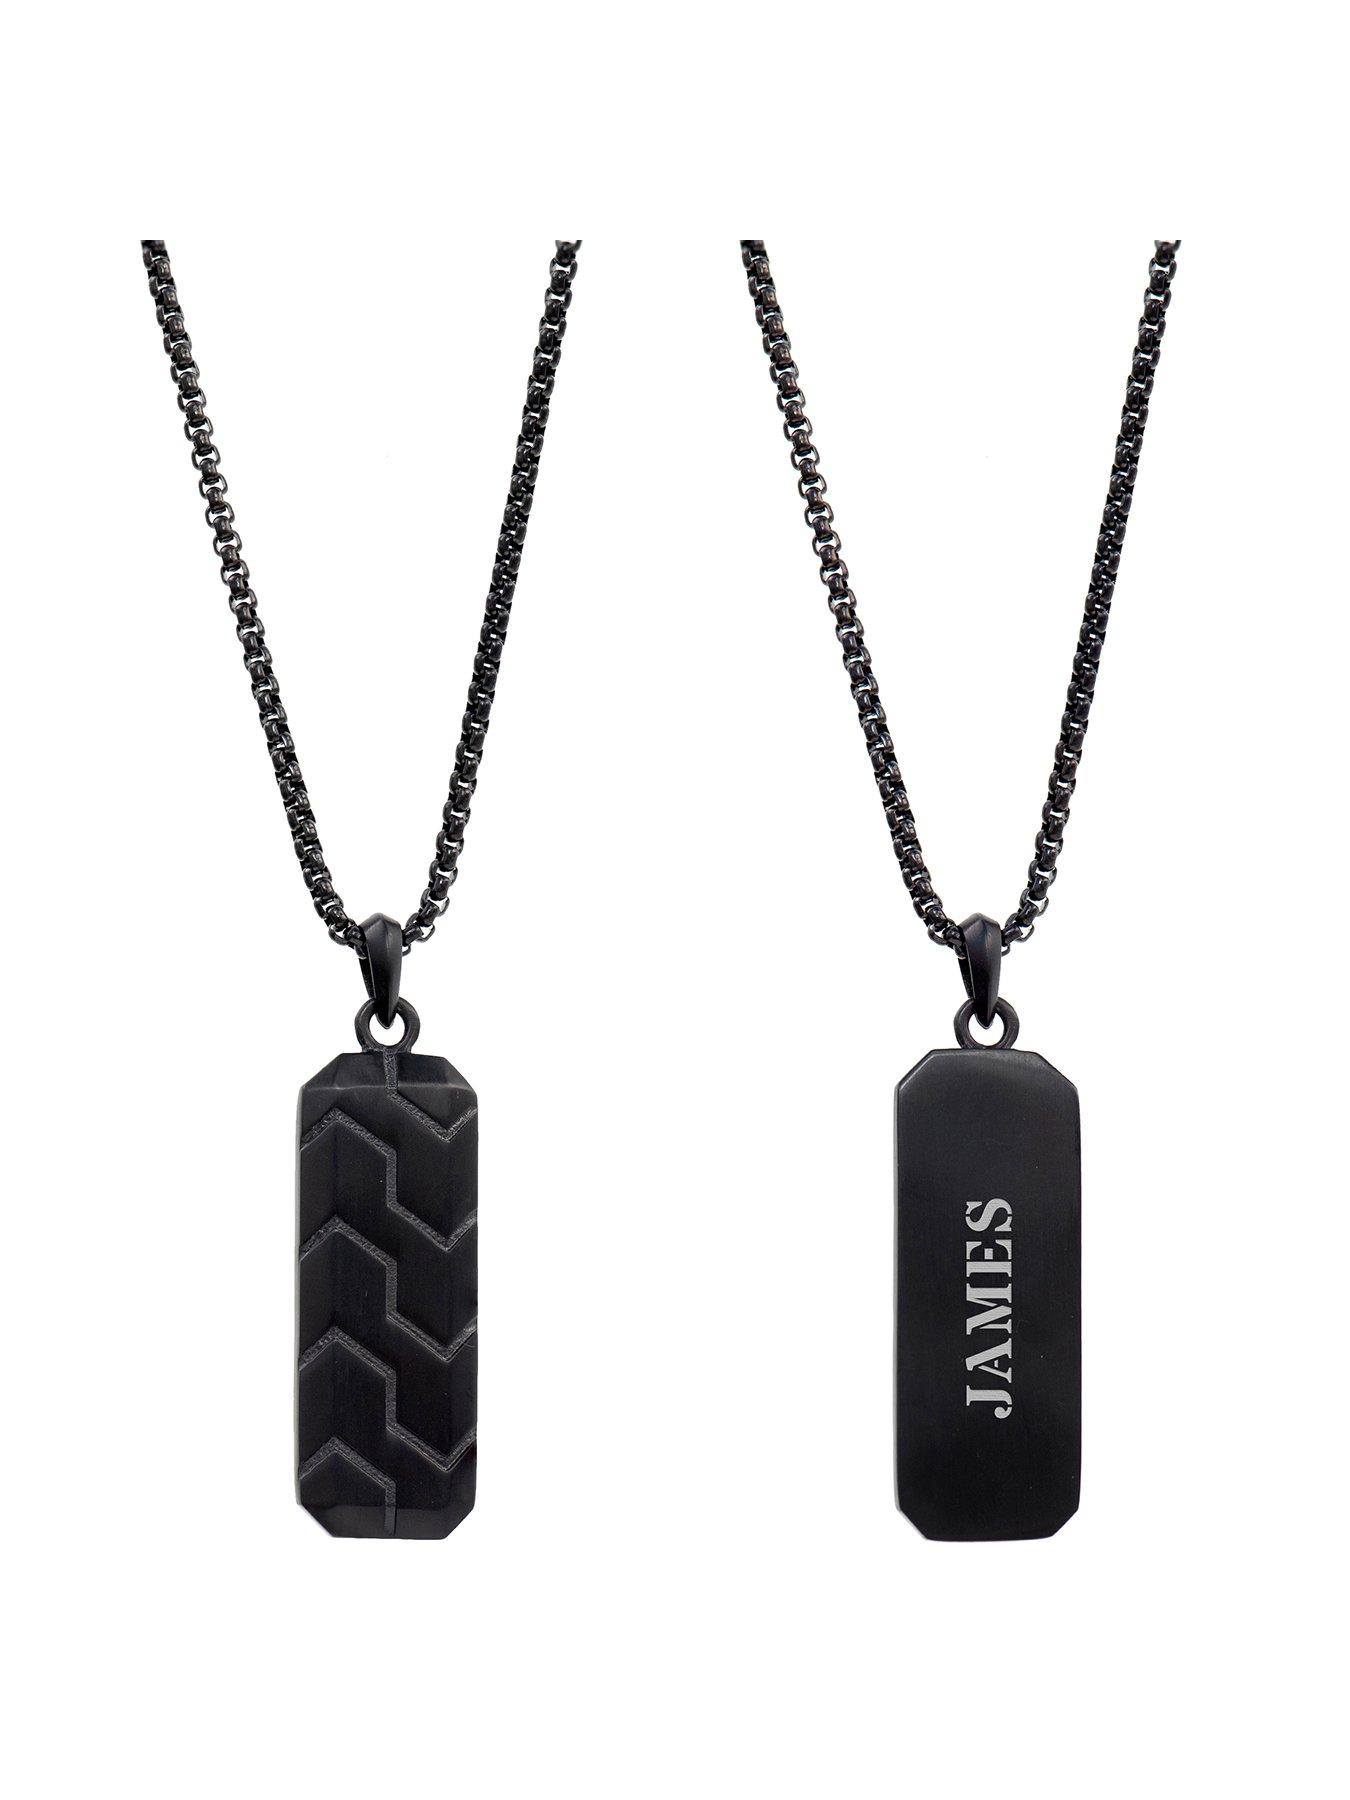 treat republic personalised black steel mens dog tag necklace